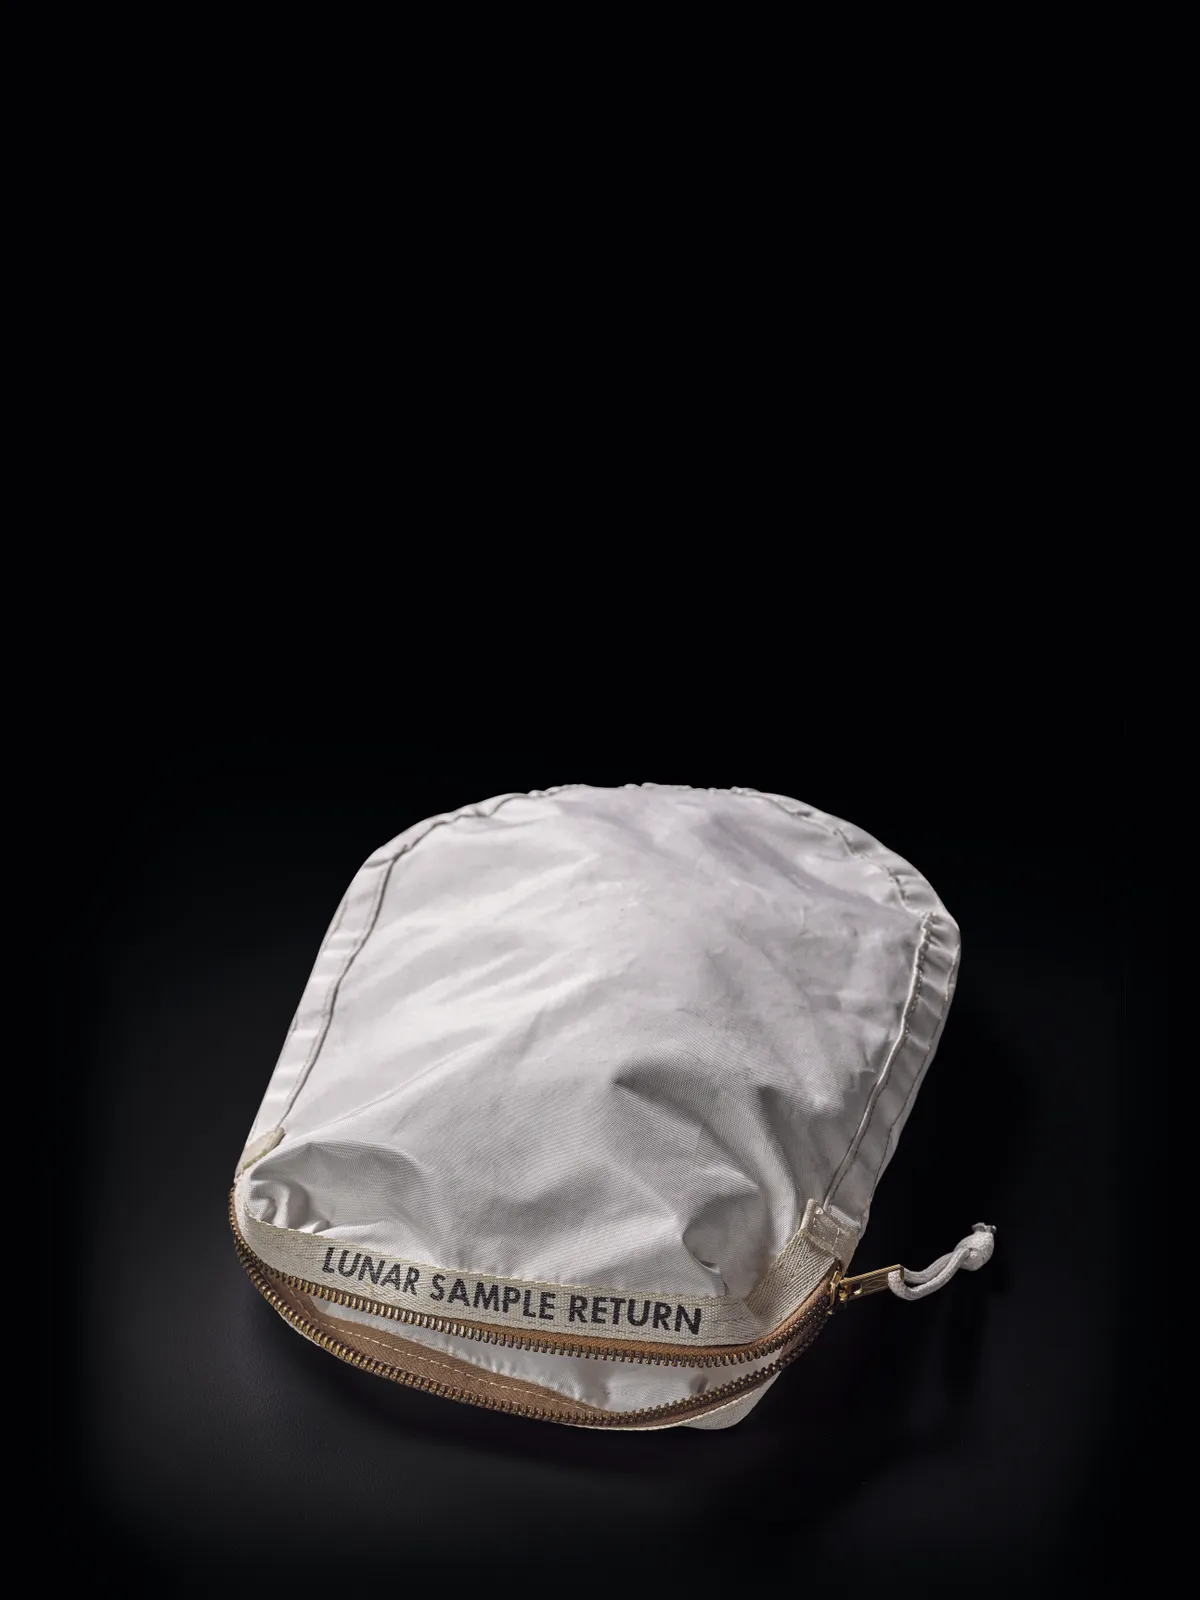 A bag used by Neil Armstrong to bring lunar samples back to earth